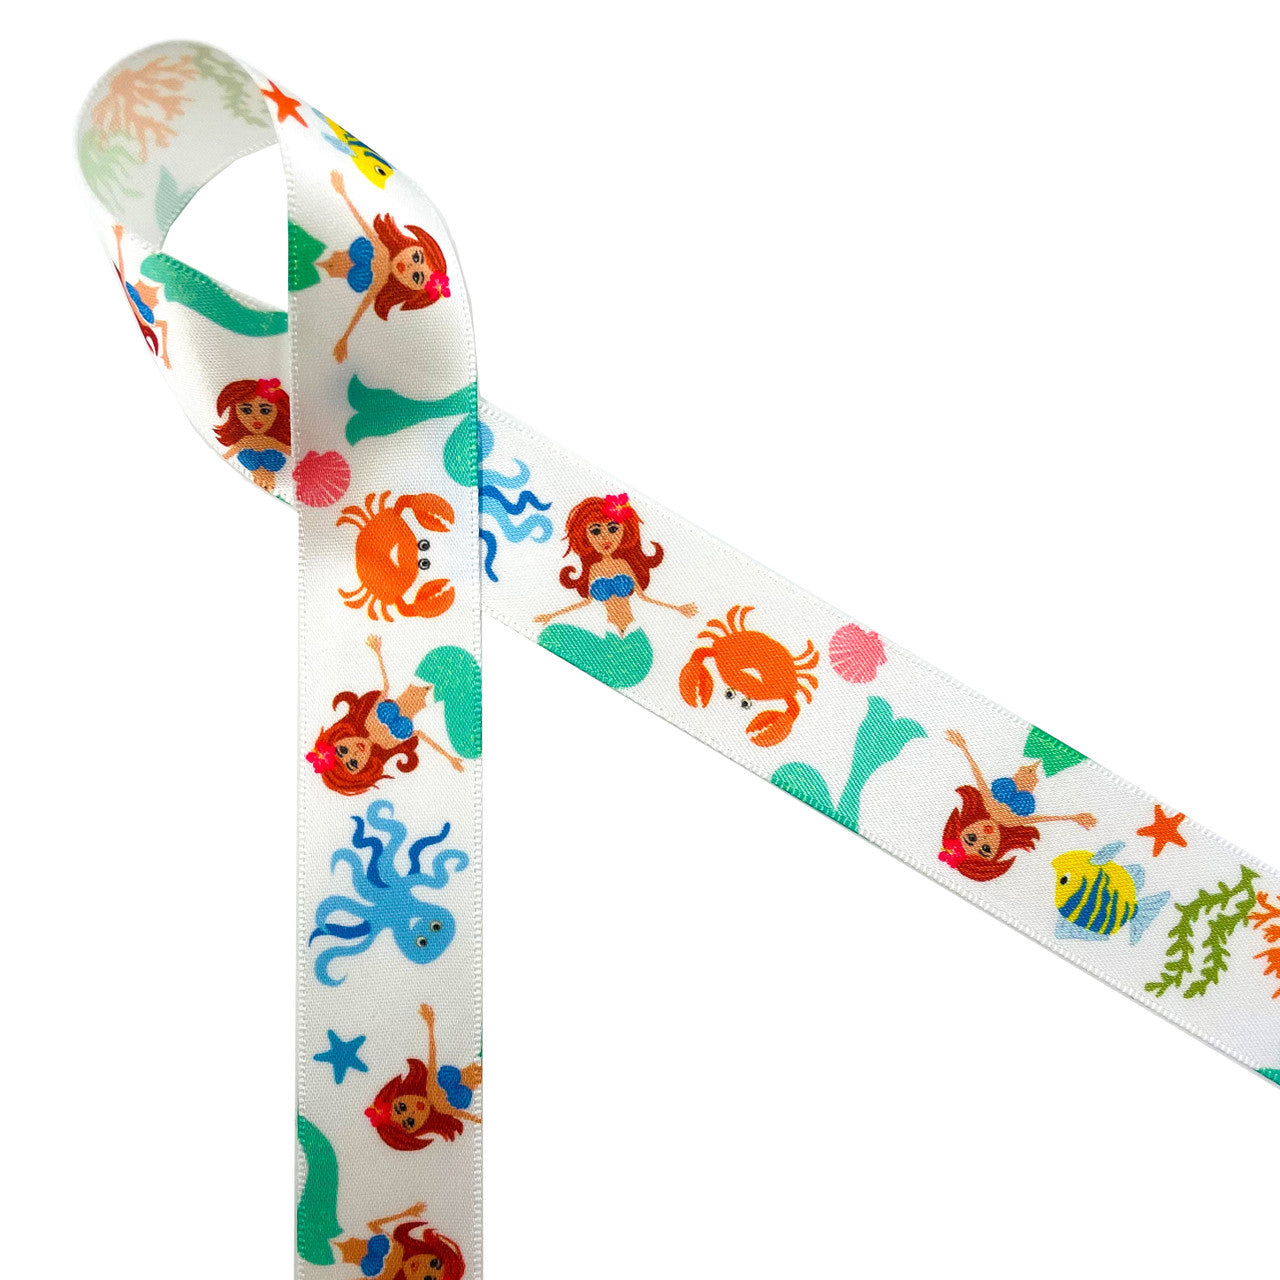 Mermaid ribbon Mermaids with flowing red with sea creatures printed on 7/8" white satin